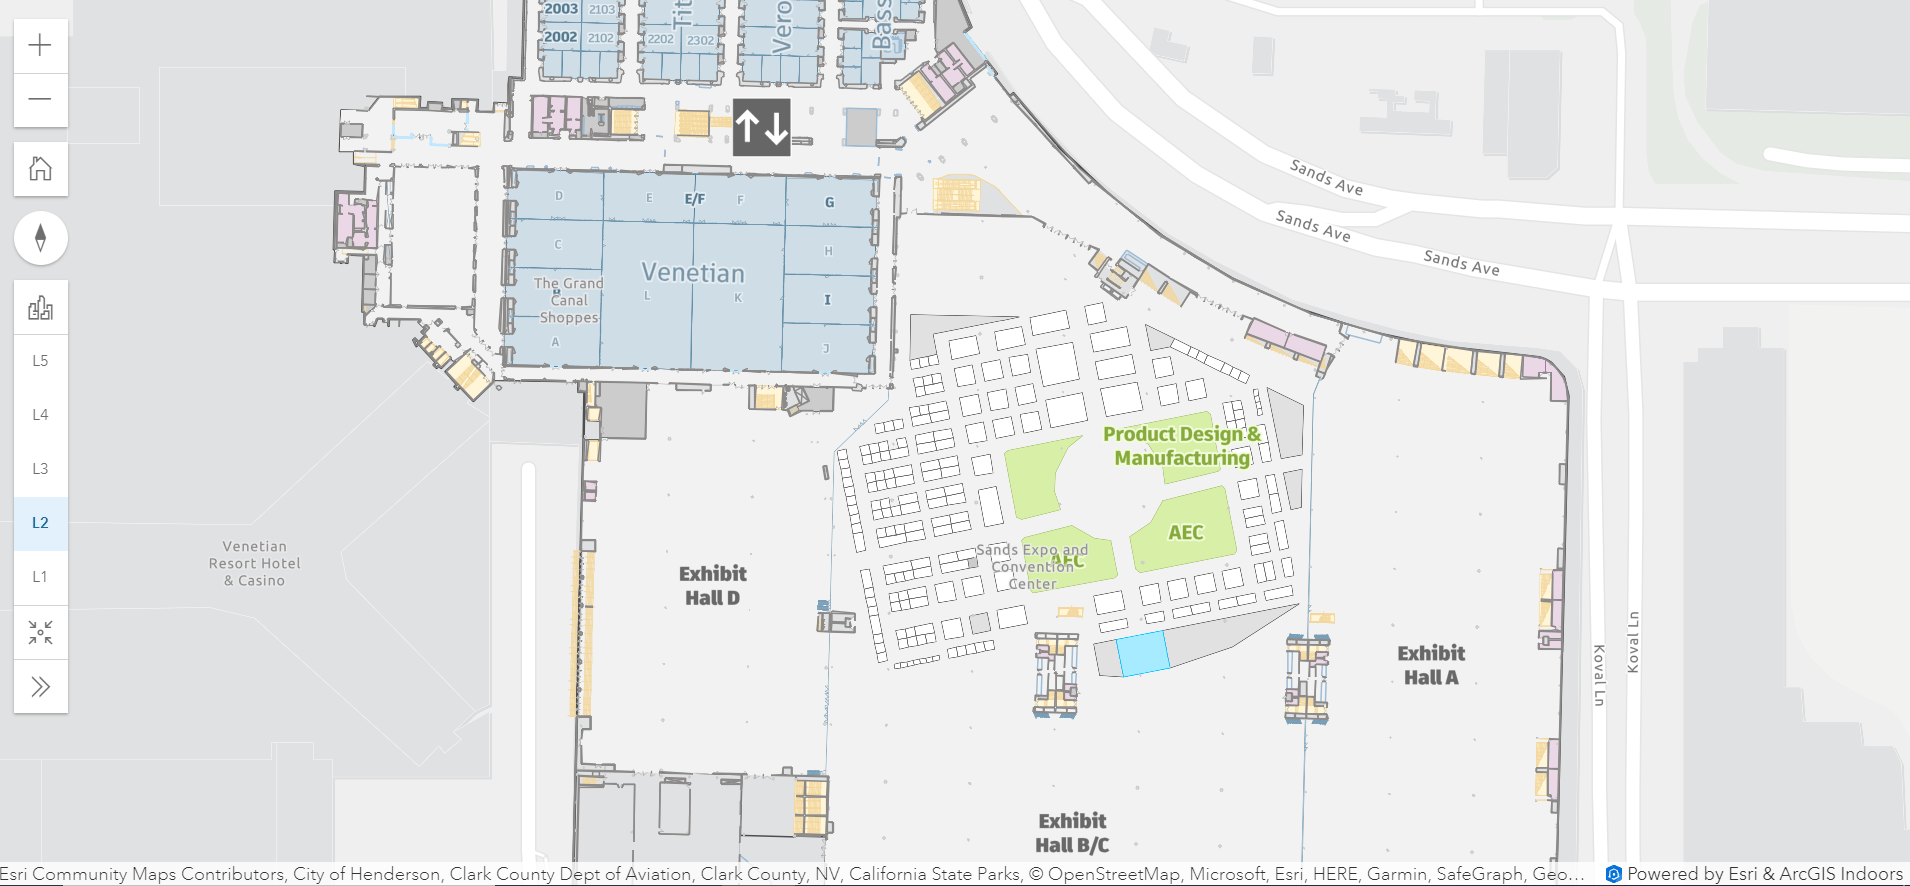 Indoor map of the Autodesk University 2023 conference